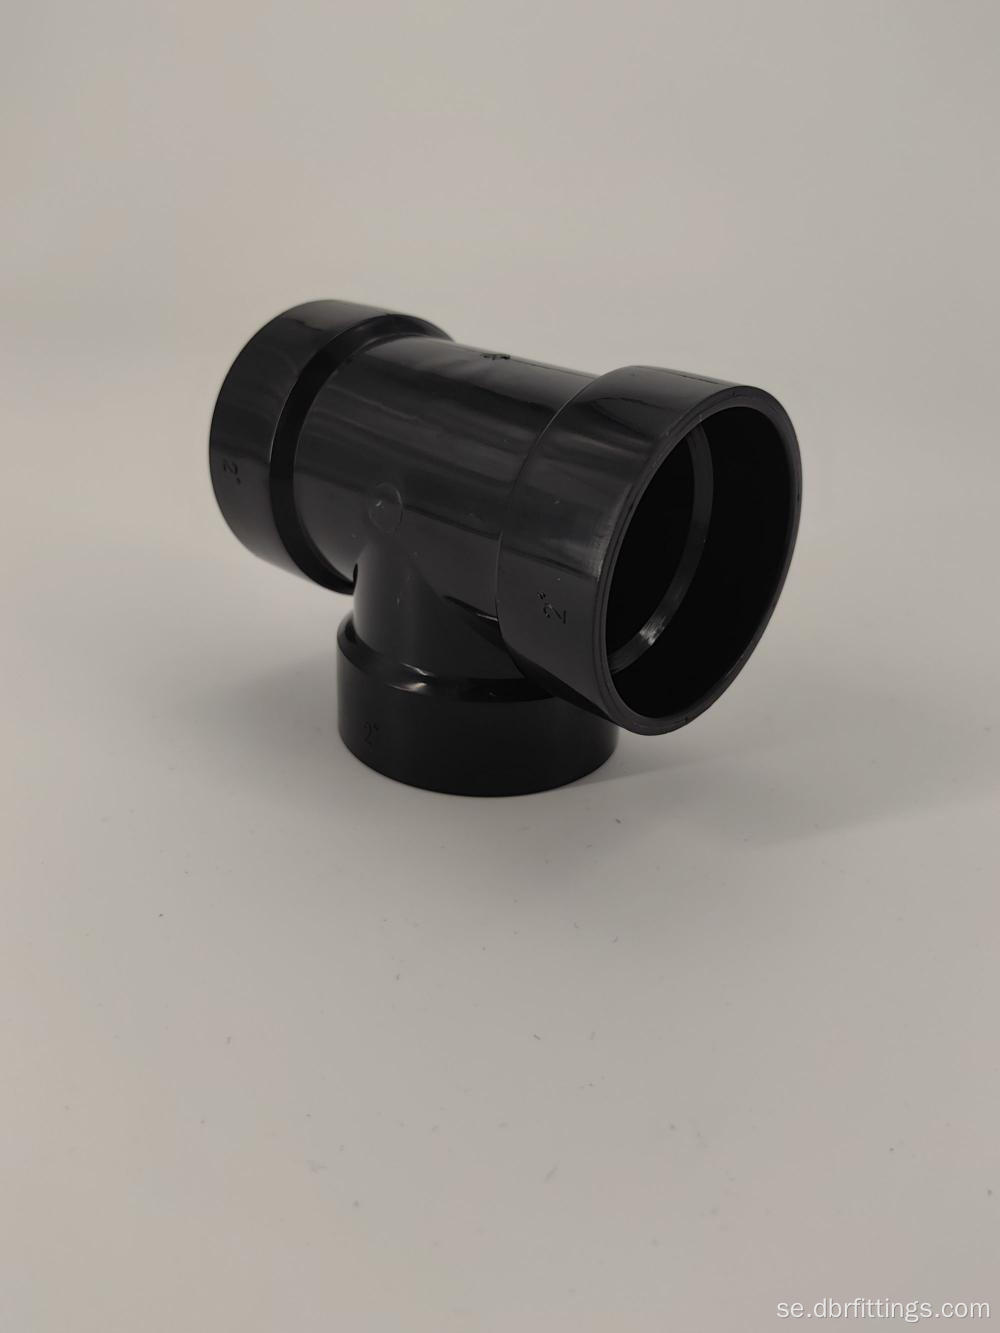 Cupc Abs Fittings vent tee